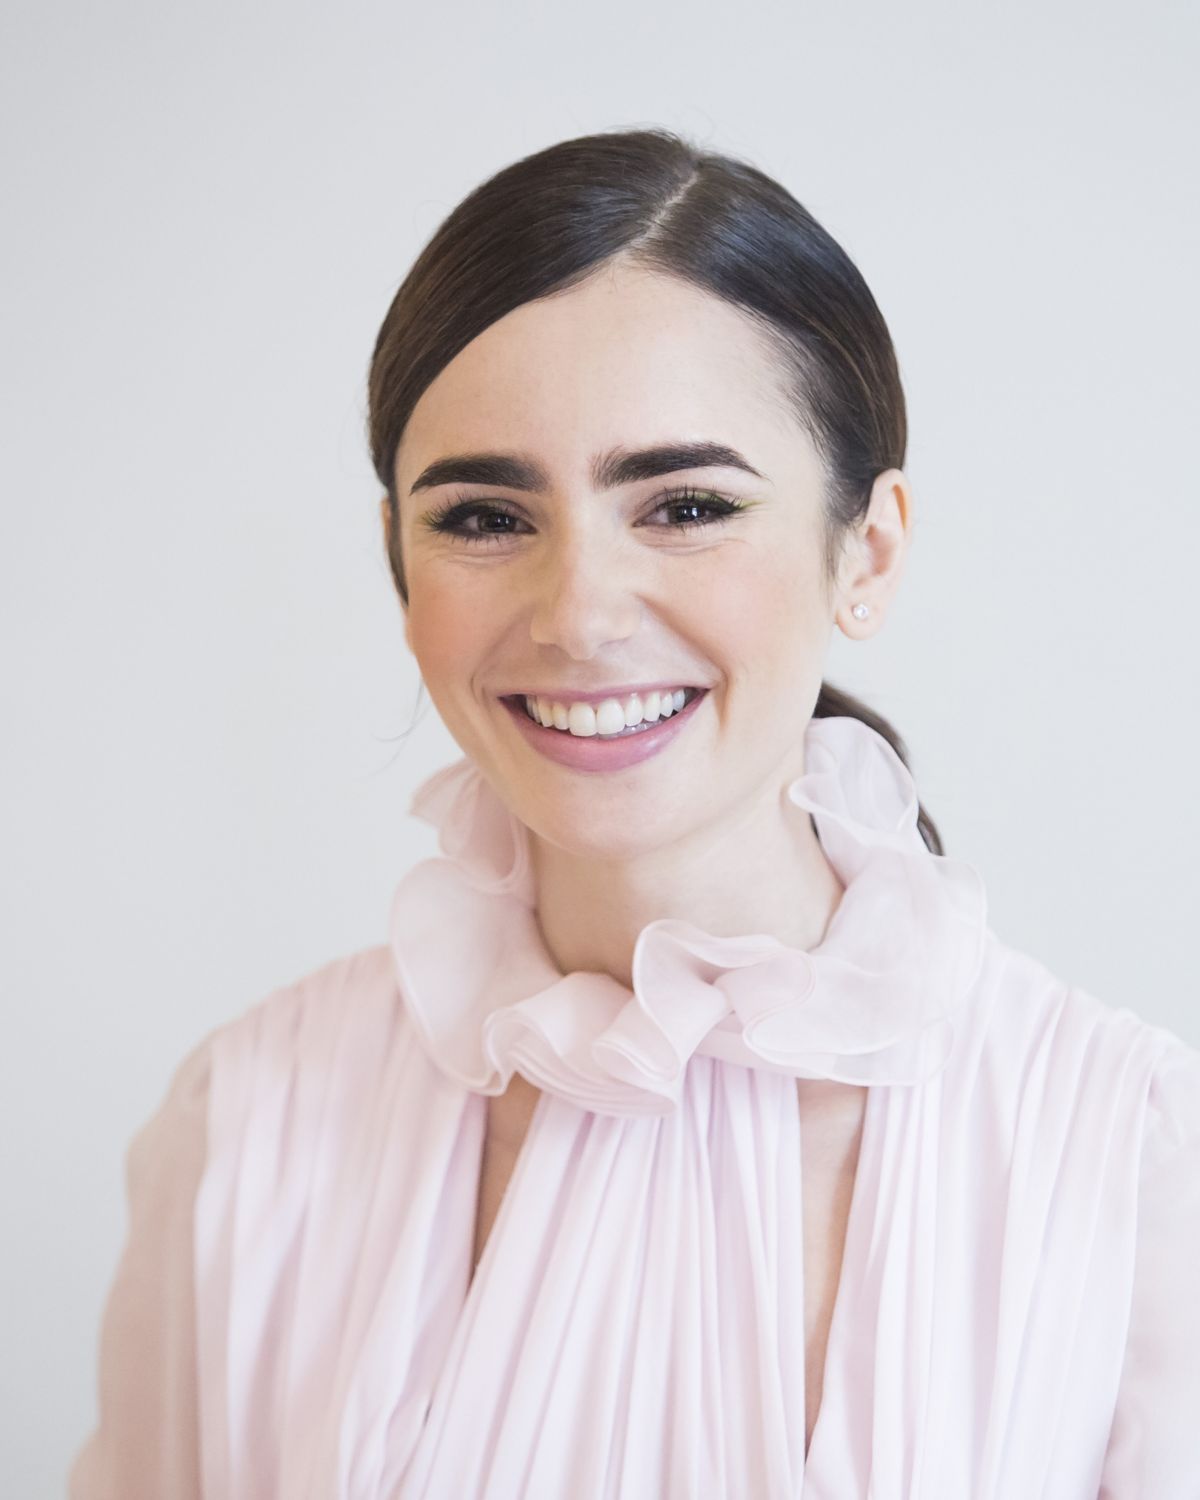 LILY COLLINS at “Rules Don’t Apply’ Press COnference in Beverly Hills ...